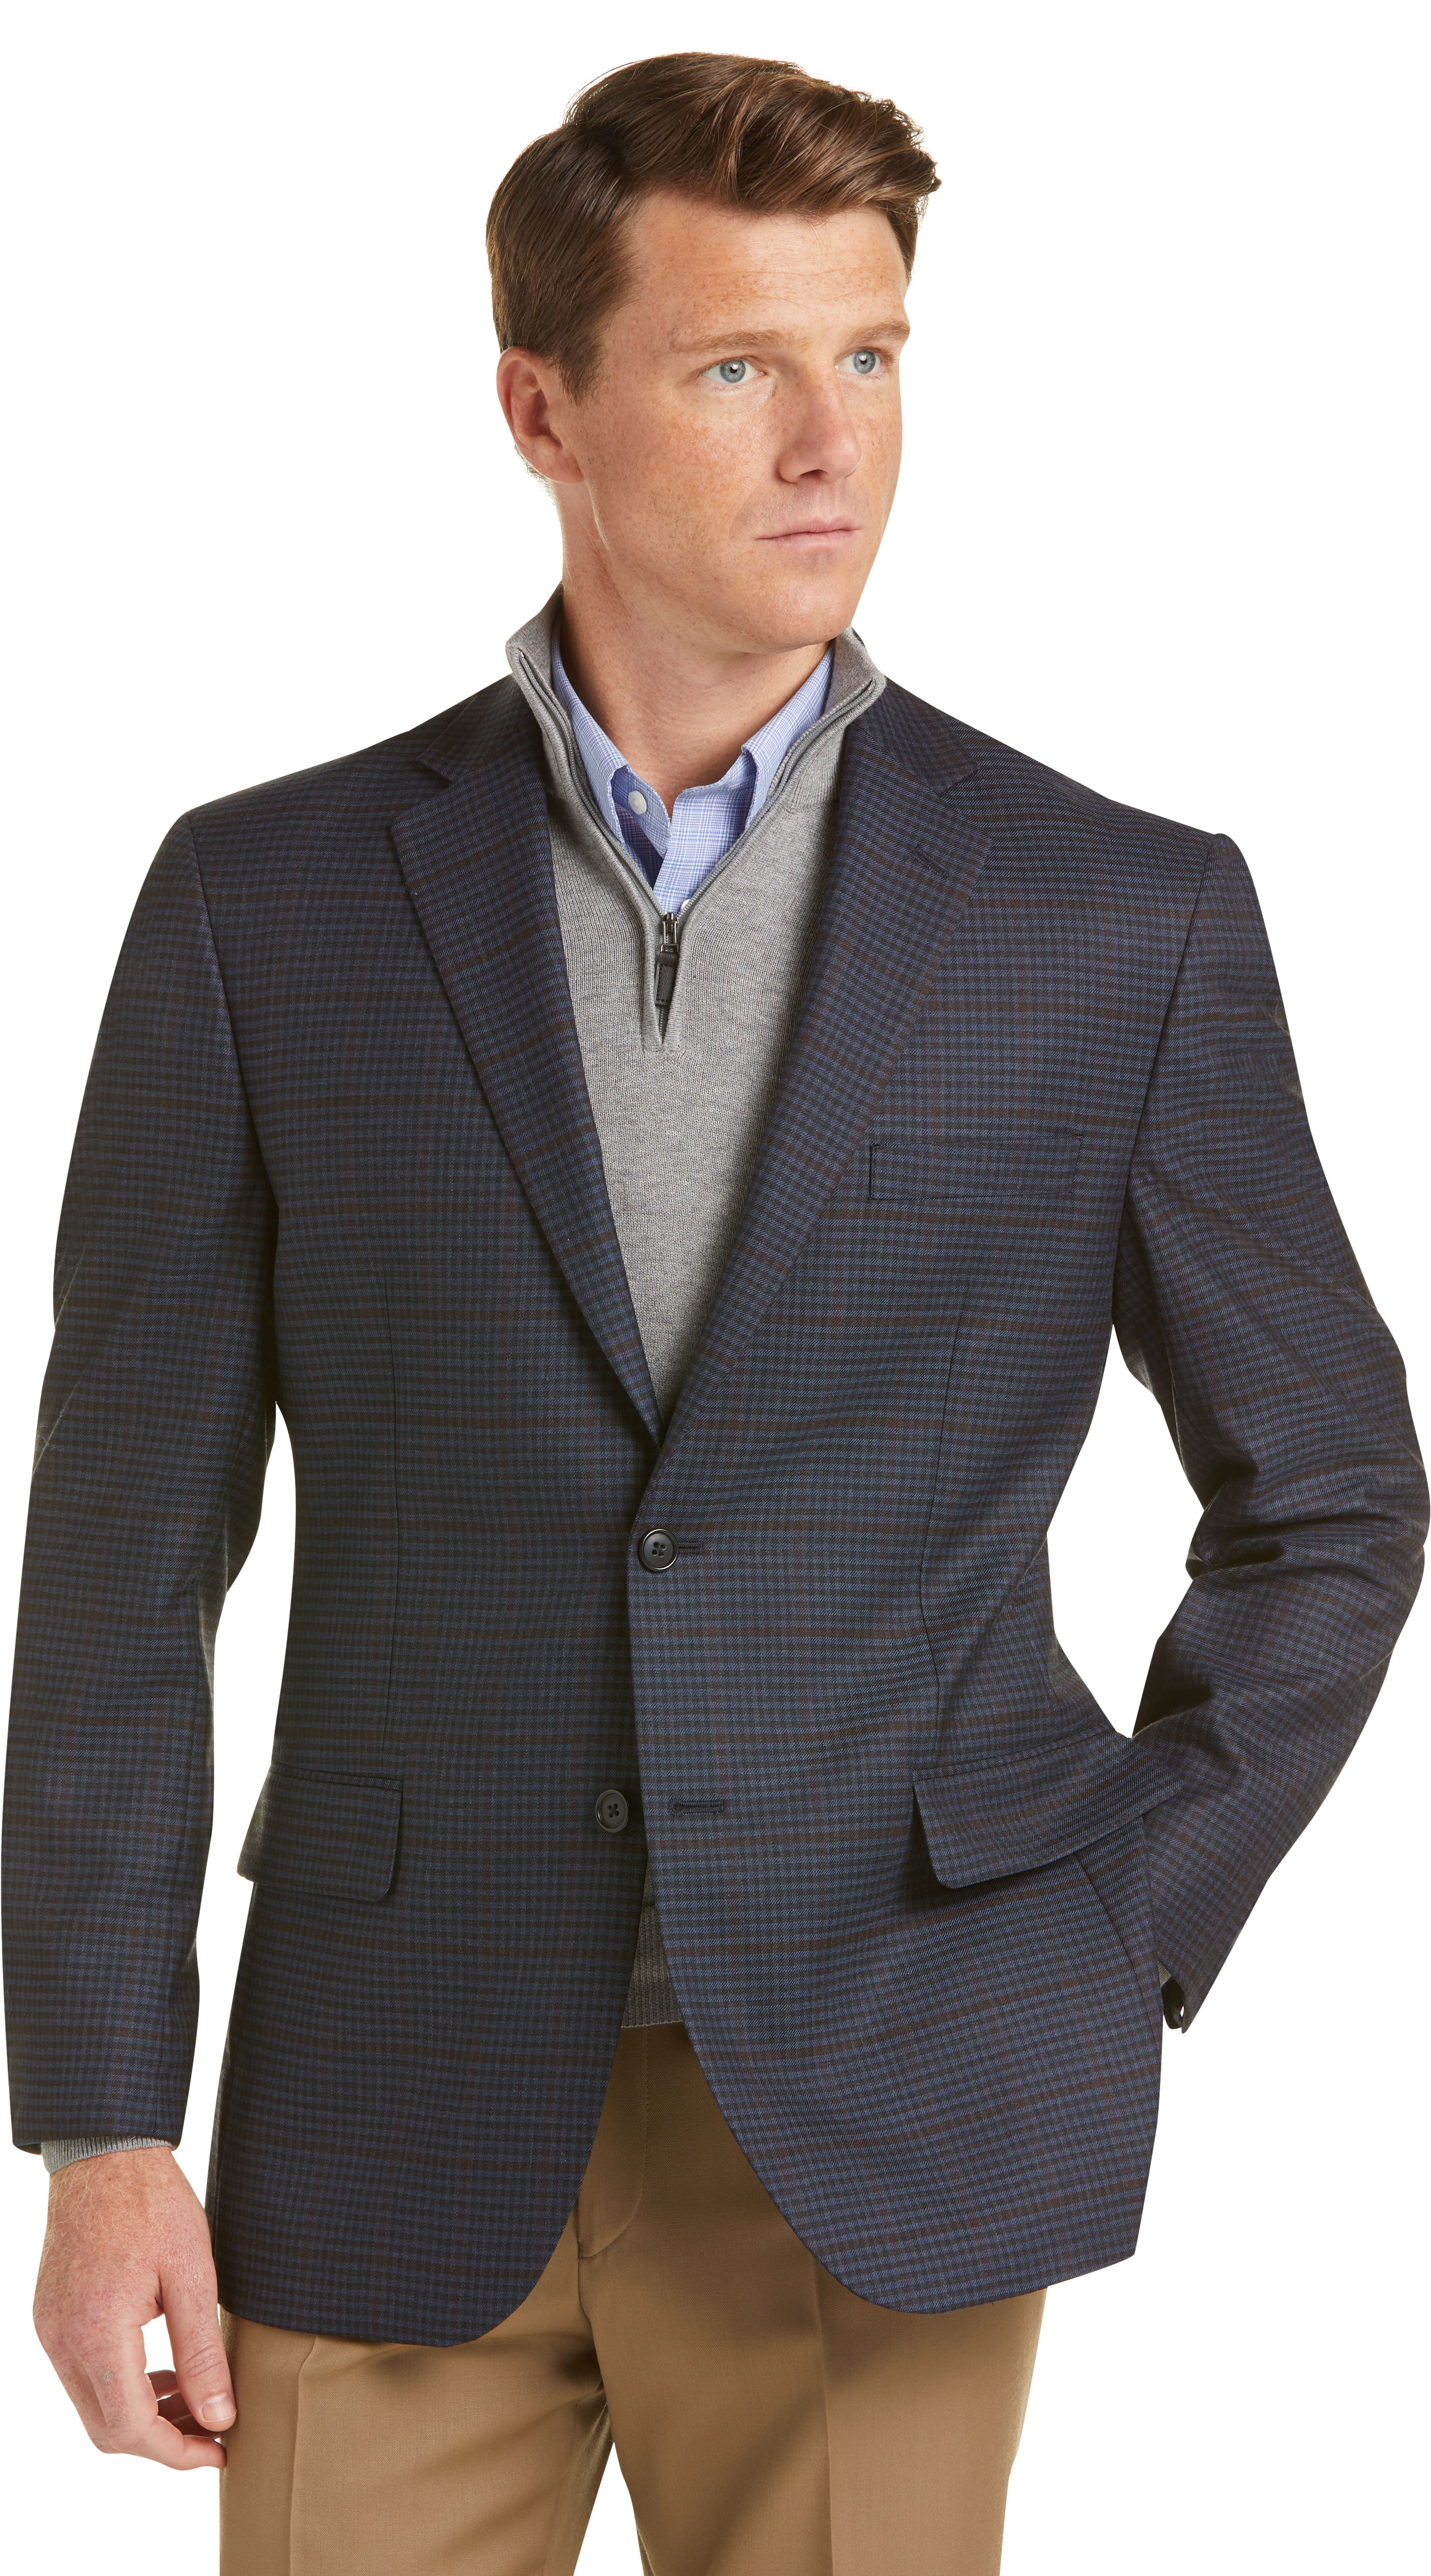 Traditional Fit Sportcoats | Men's SportCoats | JoS. A. Bank